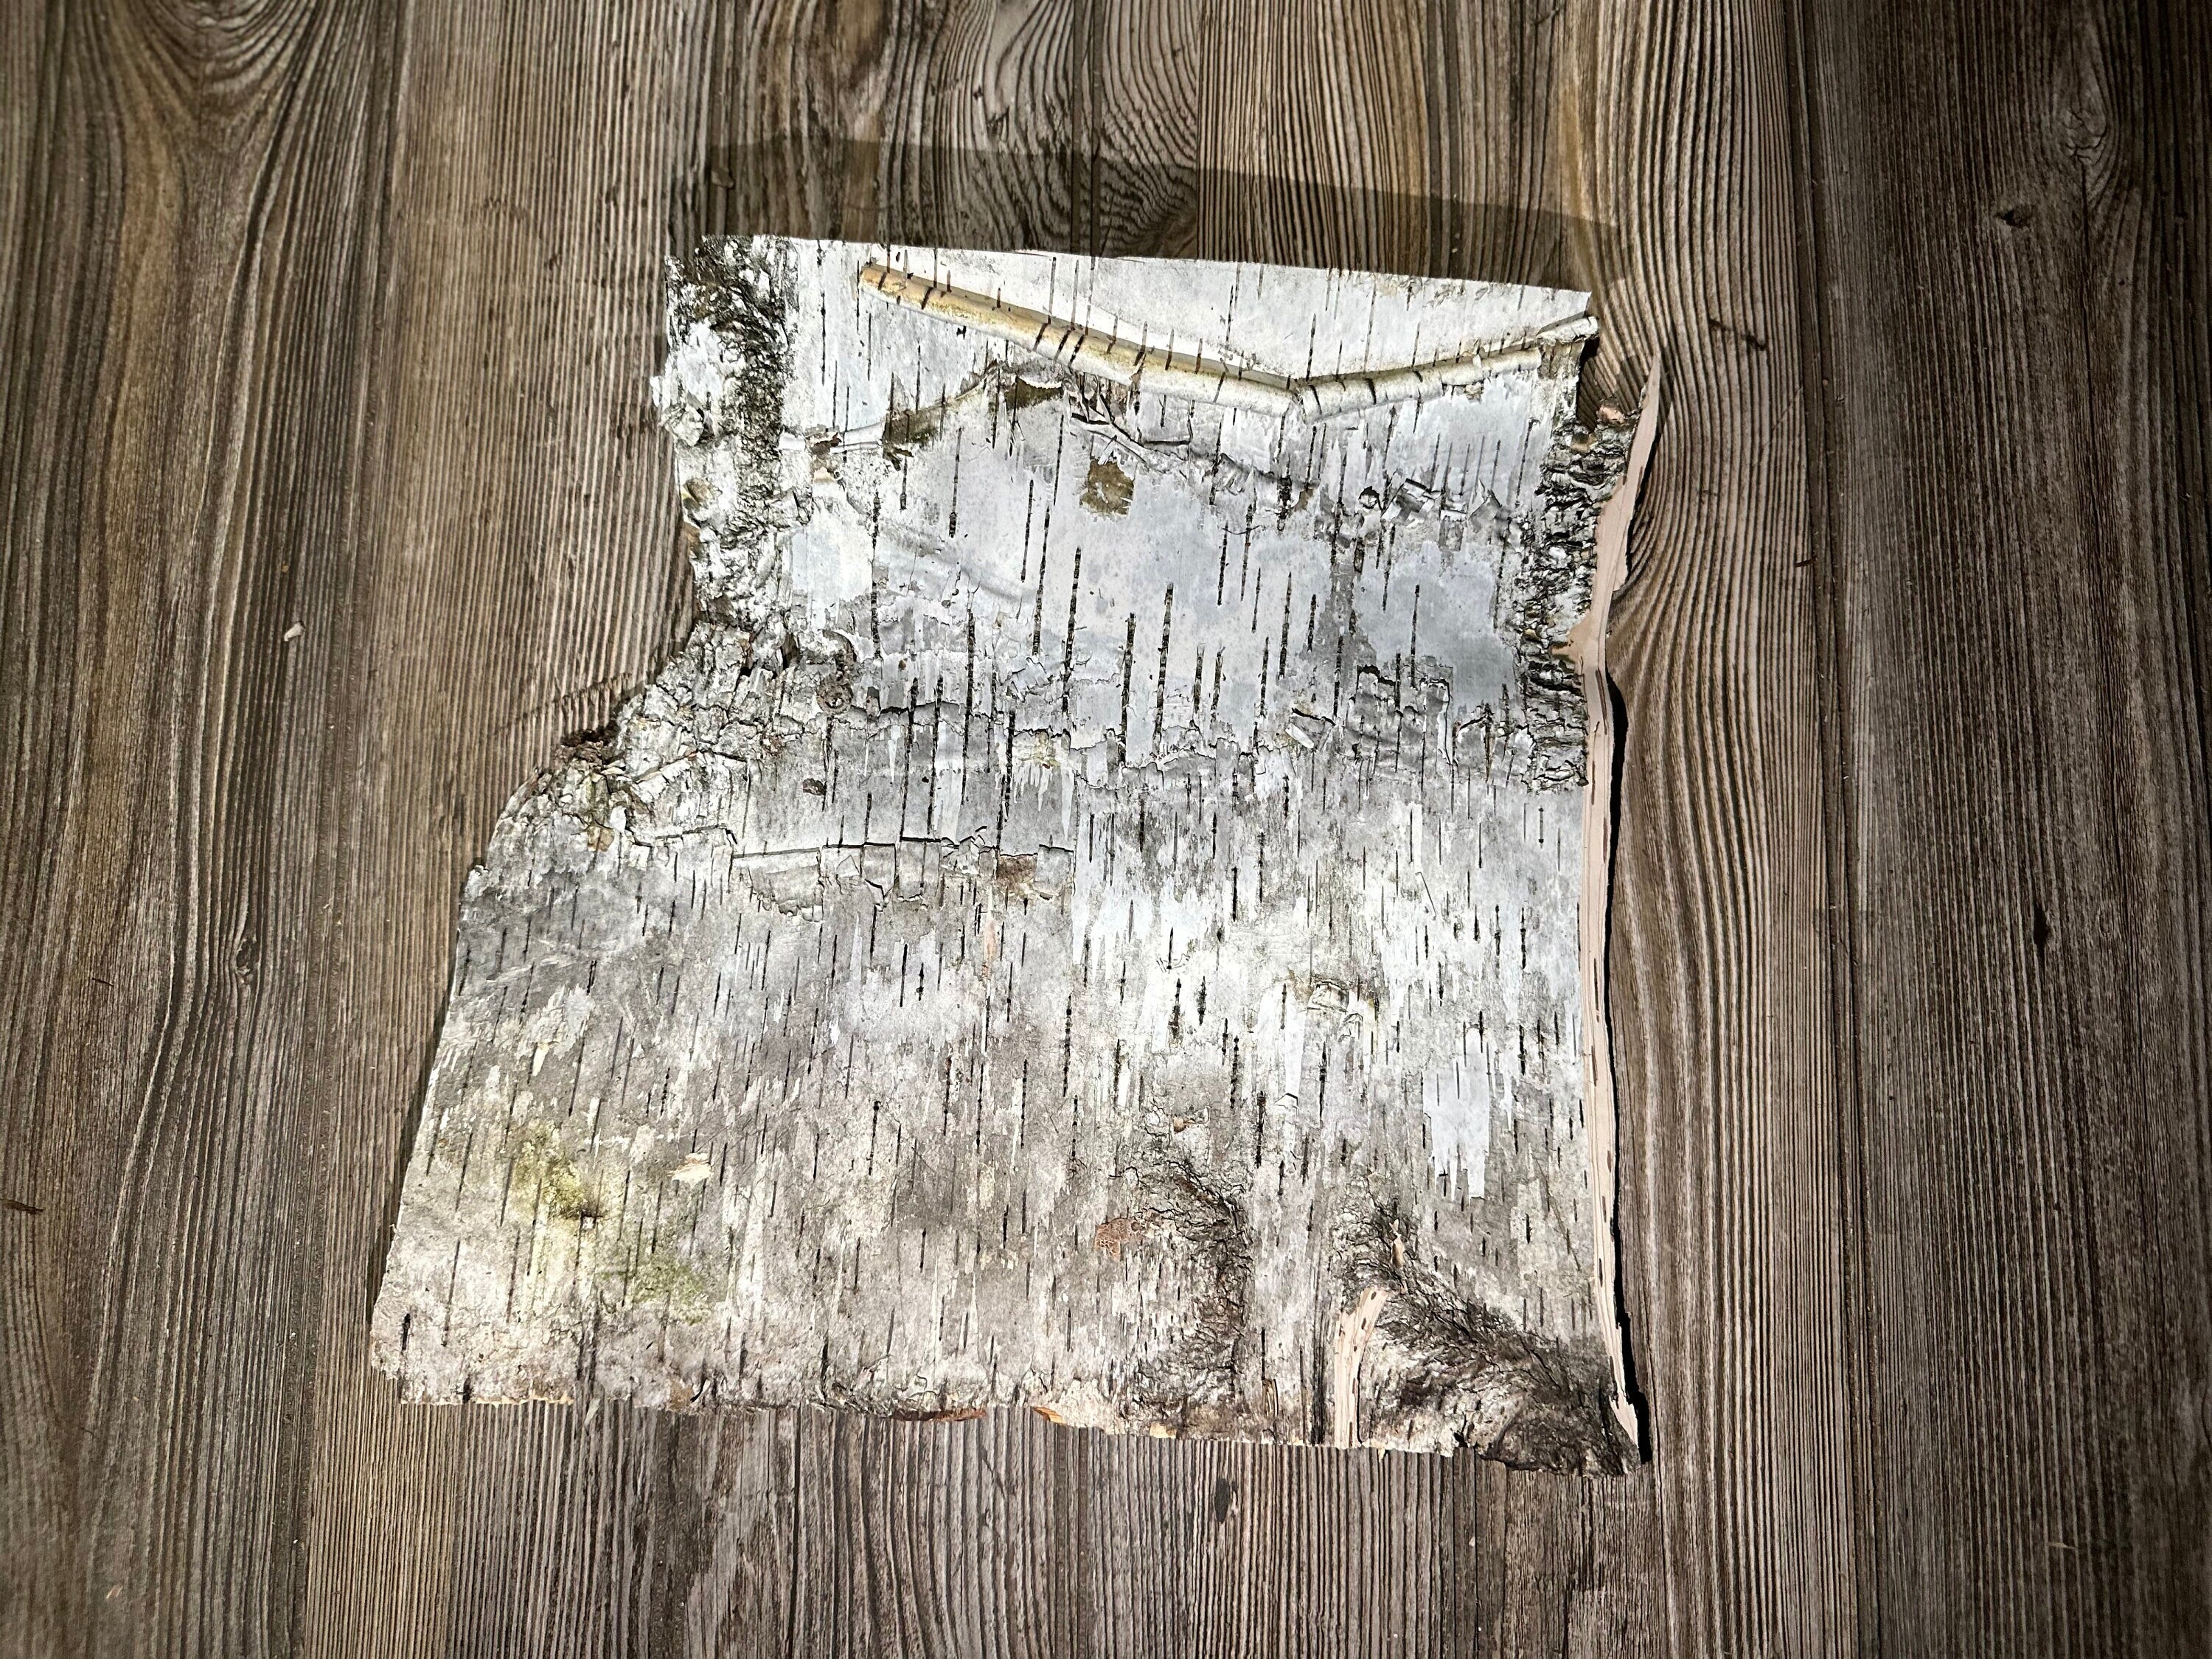 Natural White Birch Bark, White Birch Sheet, Approximately 12.5 Inches Long by 11.5 Inches Wide